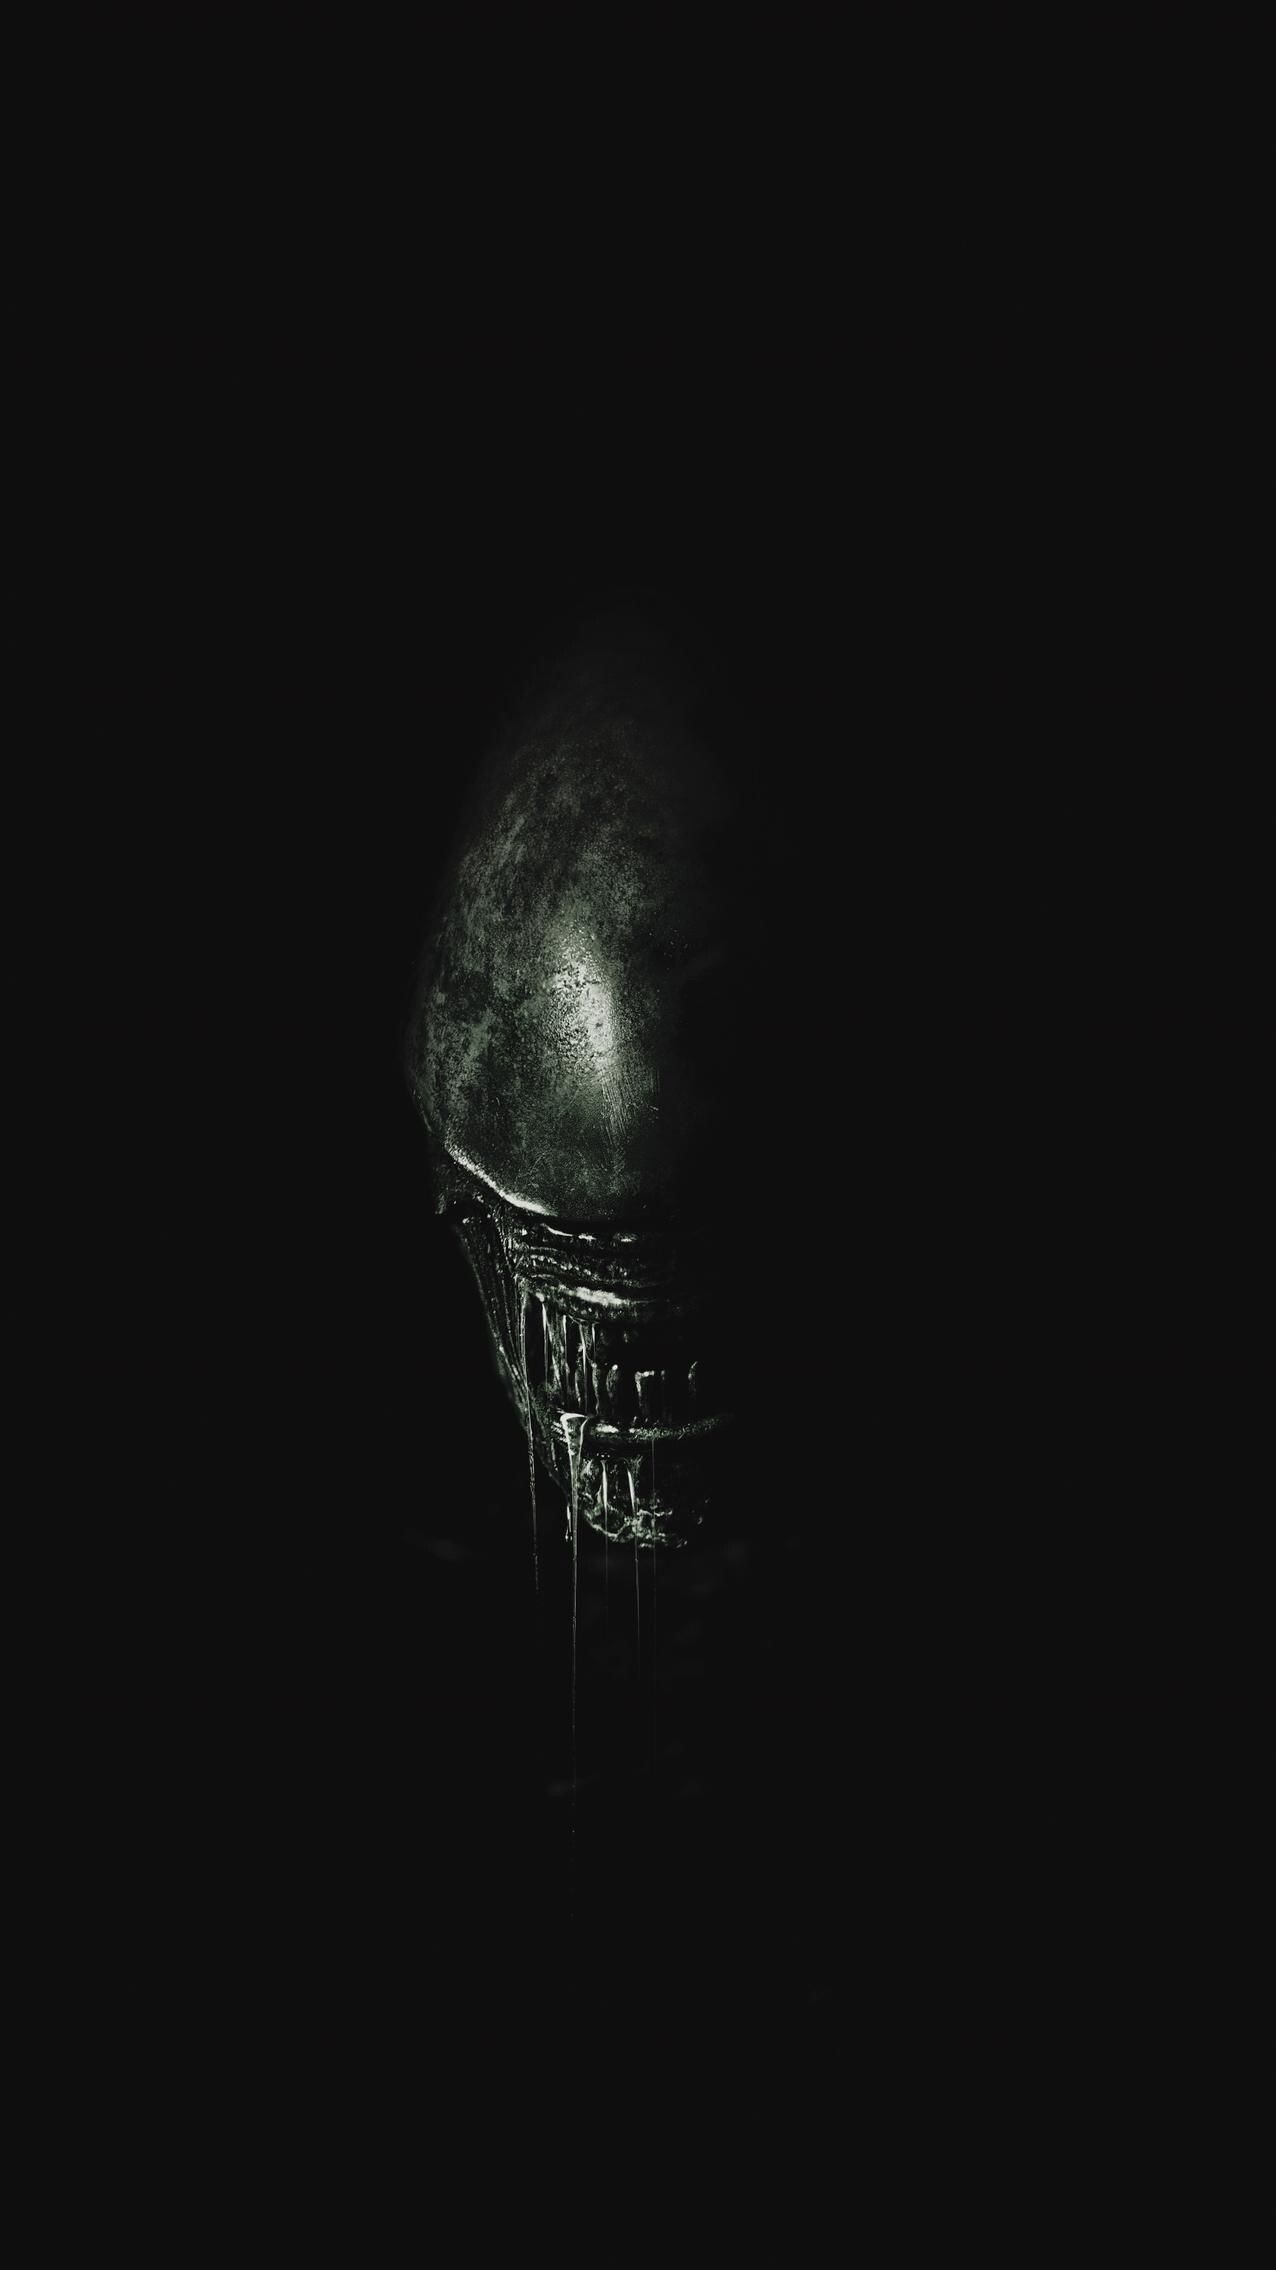 H.R. Giger: Aliens Movie Art, Science Fiction Action Film, The Second Film In The Franchise, Written And Directed By James Cameron. 1280x2270 HD Background.